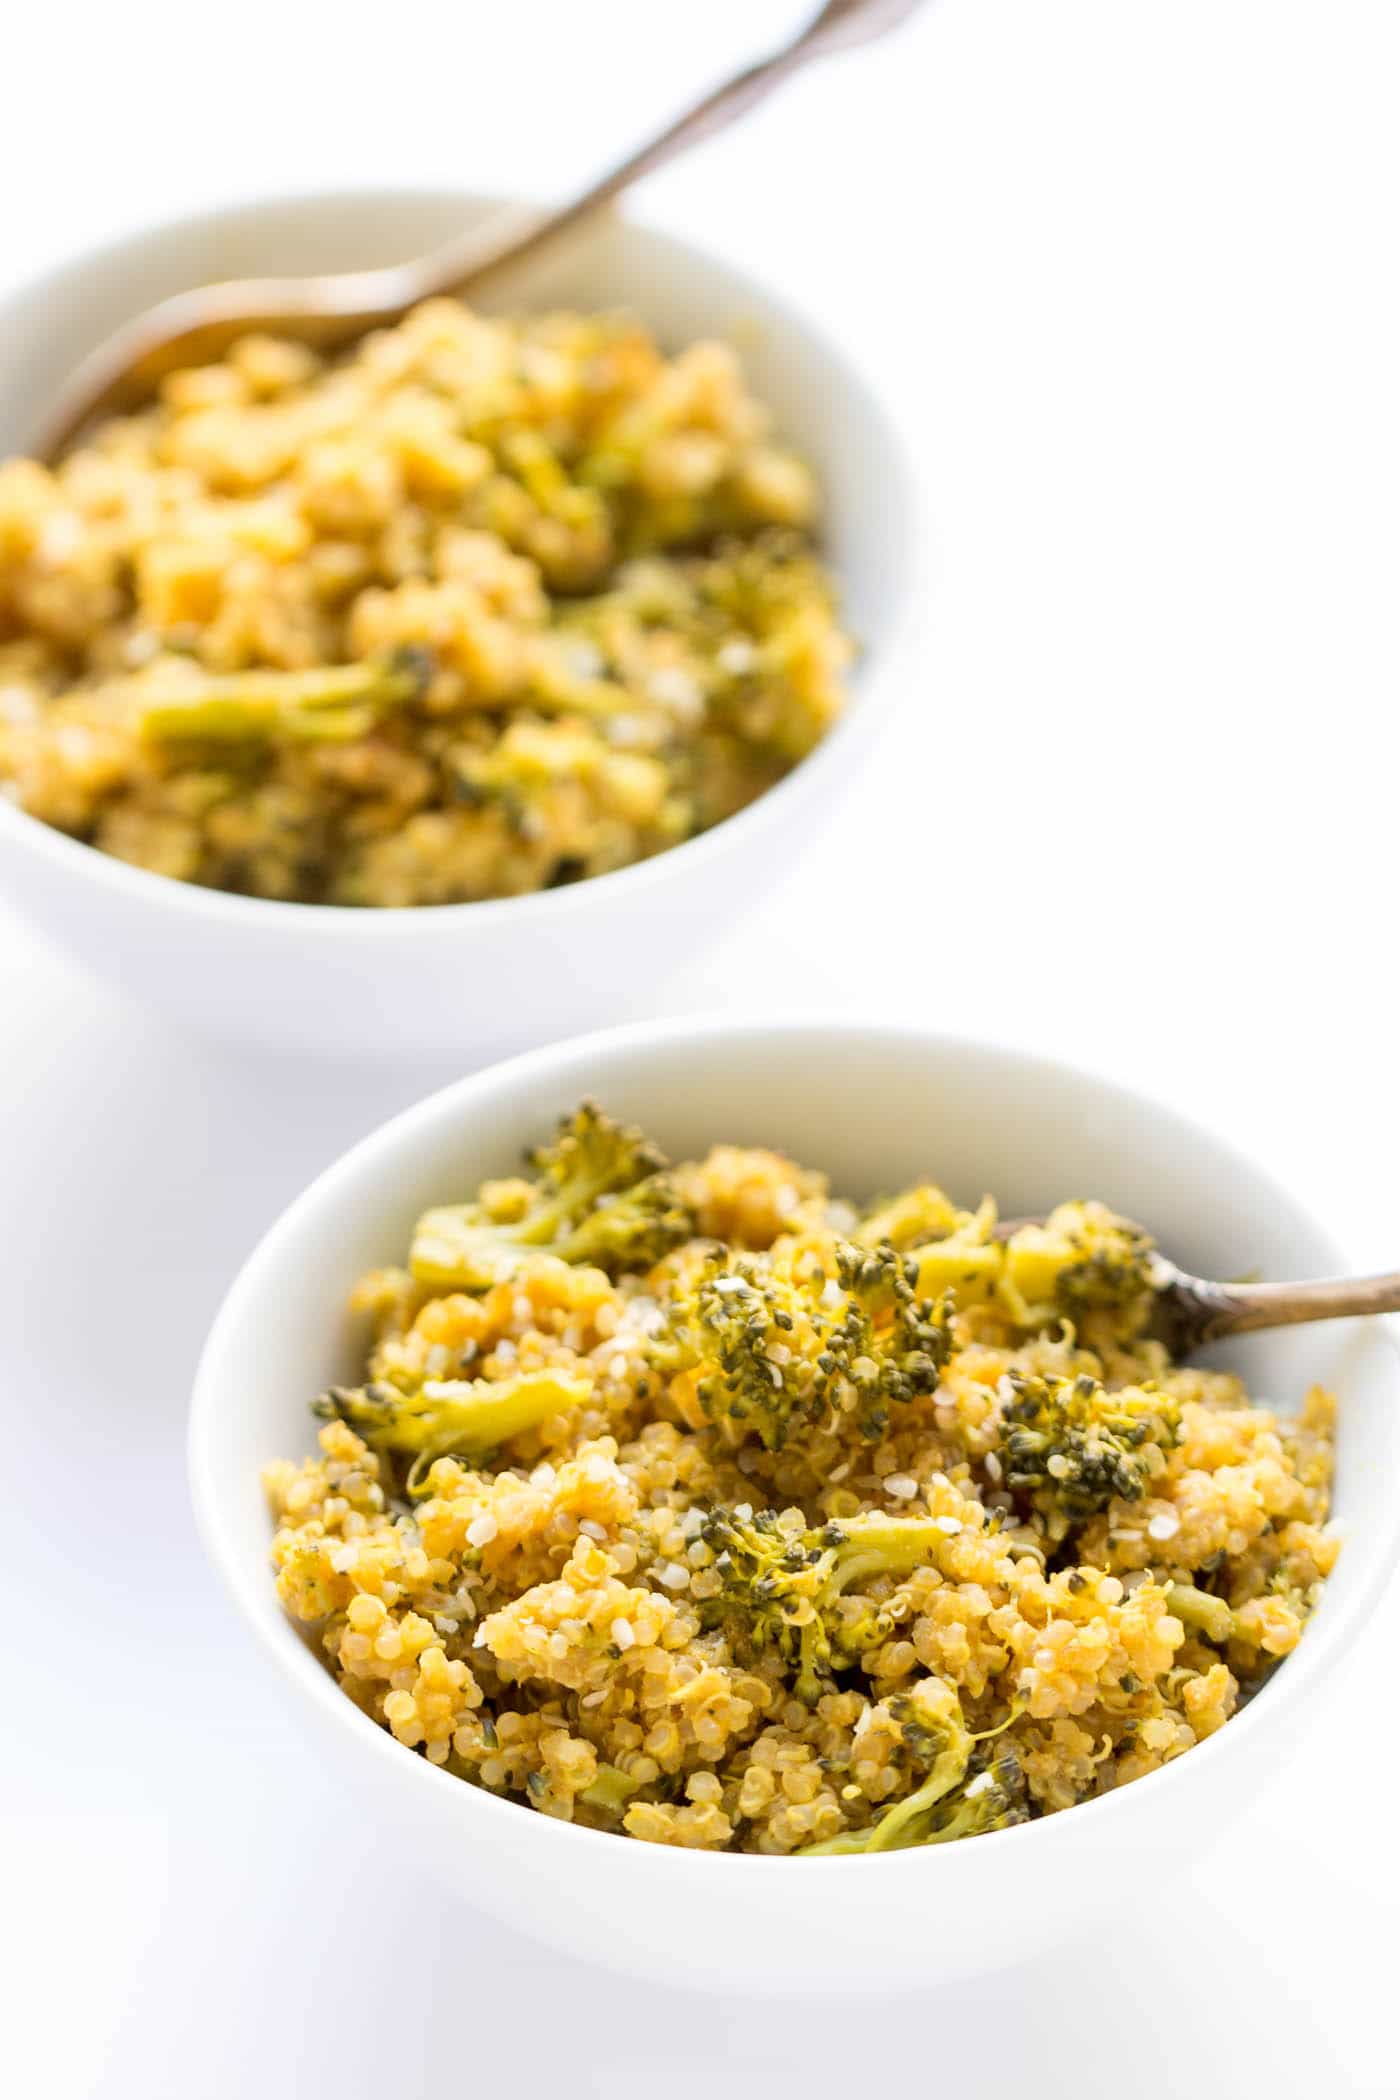 5-INGREDIENT Vegan Quinoa Mac & Cheese! Warm fluffy quinoa and broccoli coated in tons of cheesy flavor!